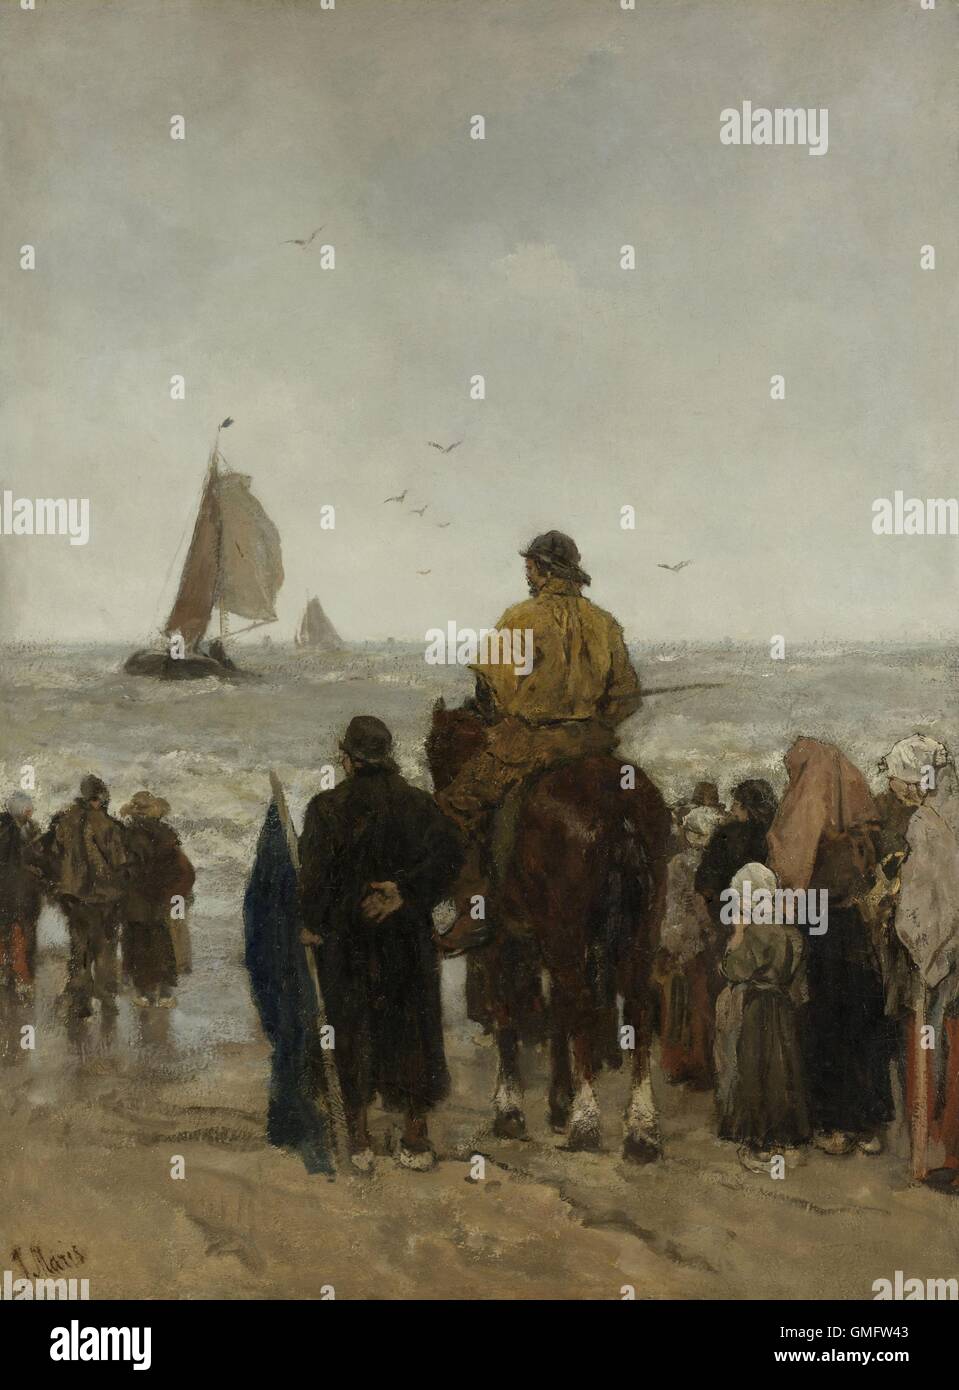 Arrival of the Boats, by Jacob Maris, 1884, Dutch painting, oil on canvas. At Scheveningen, beach at The Hague, the horse would Stock Photo